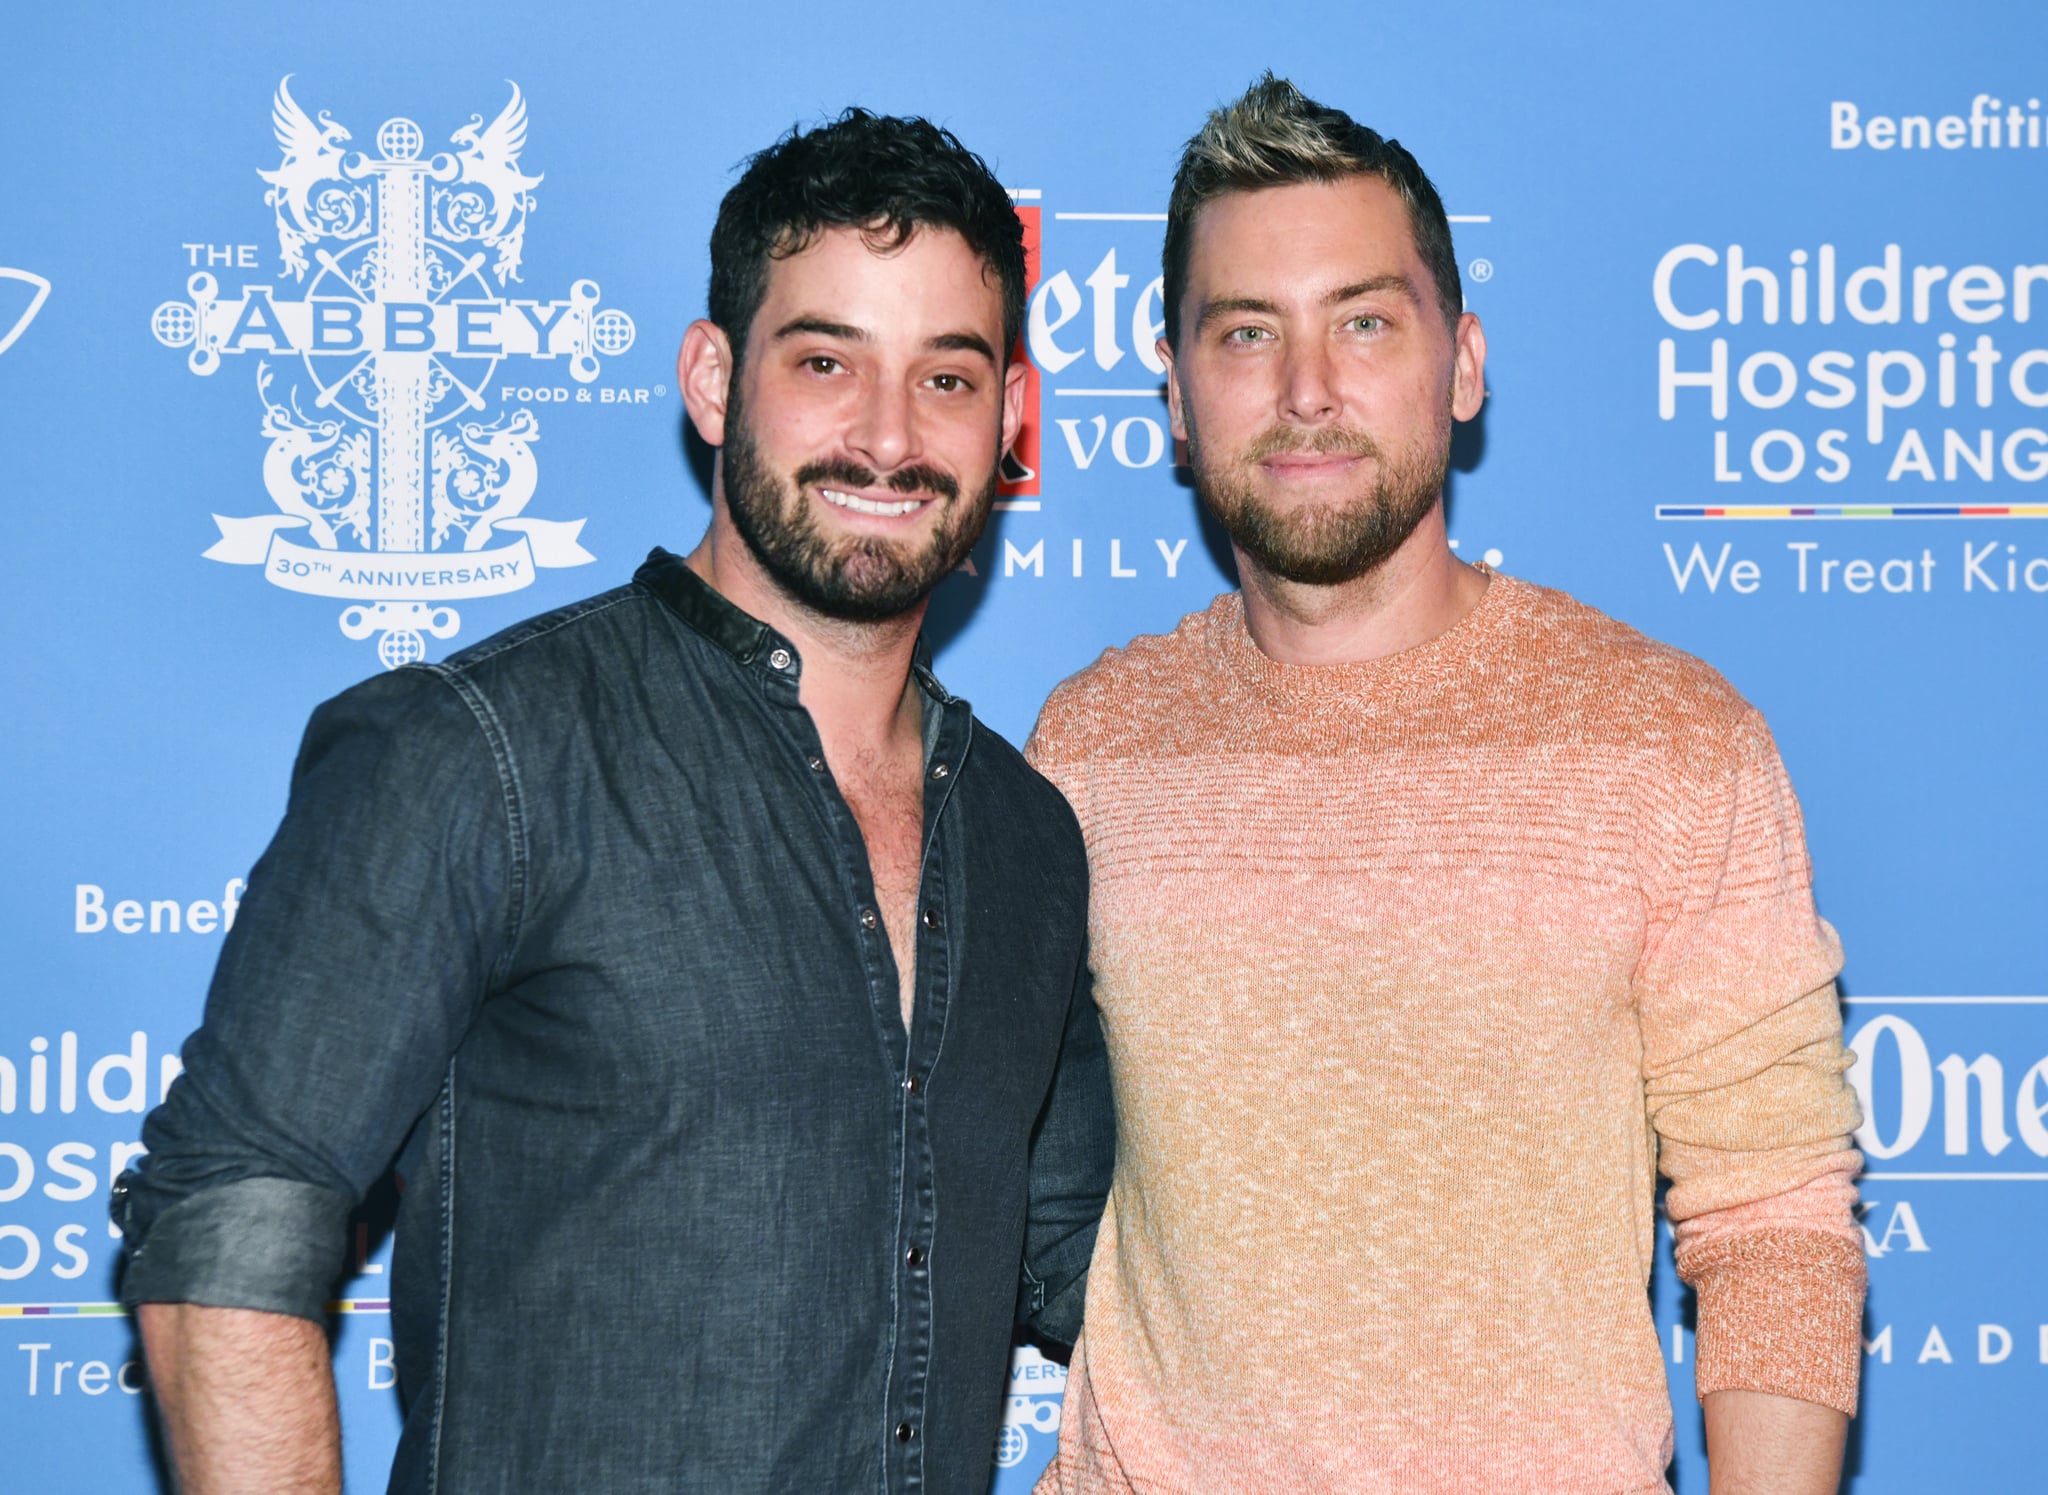 WEST HOLLYWOOD, CALIFORNIA - SEPTEMBER 21: (L-R) Michael Turchin and Lance Bass attend The Abbey's 16th annual Toy Drive for Children's Hospital LA at The Abbey Food & Bar on September 21, 2021 in West Hollywood, California. (Photo by Rodin Eckenroth/Getty Images)